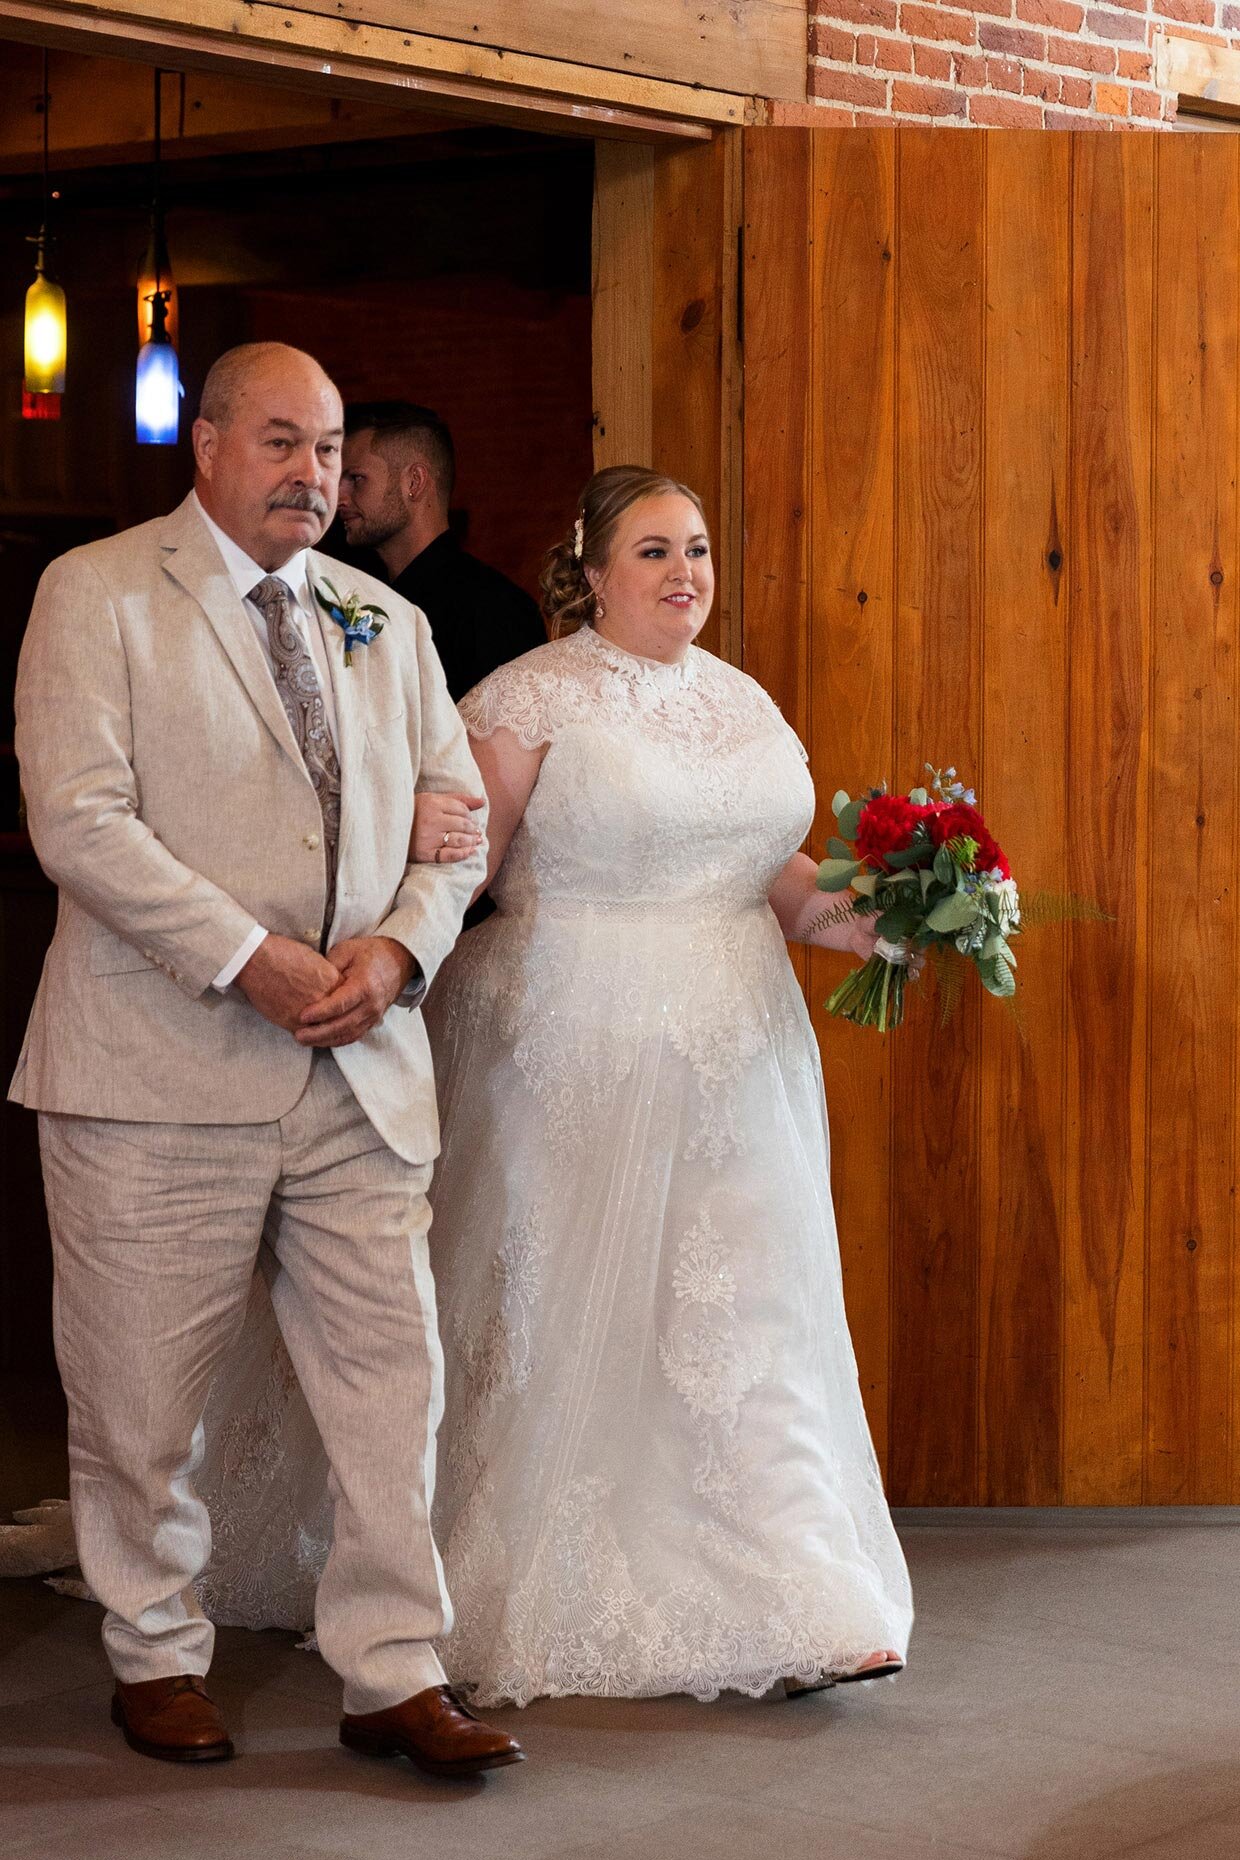 Ceremony processional bride walks down aisle with dad